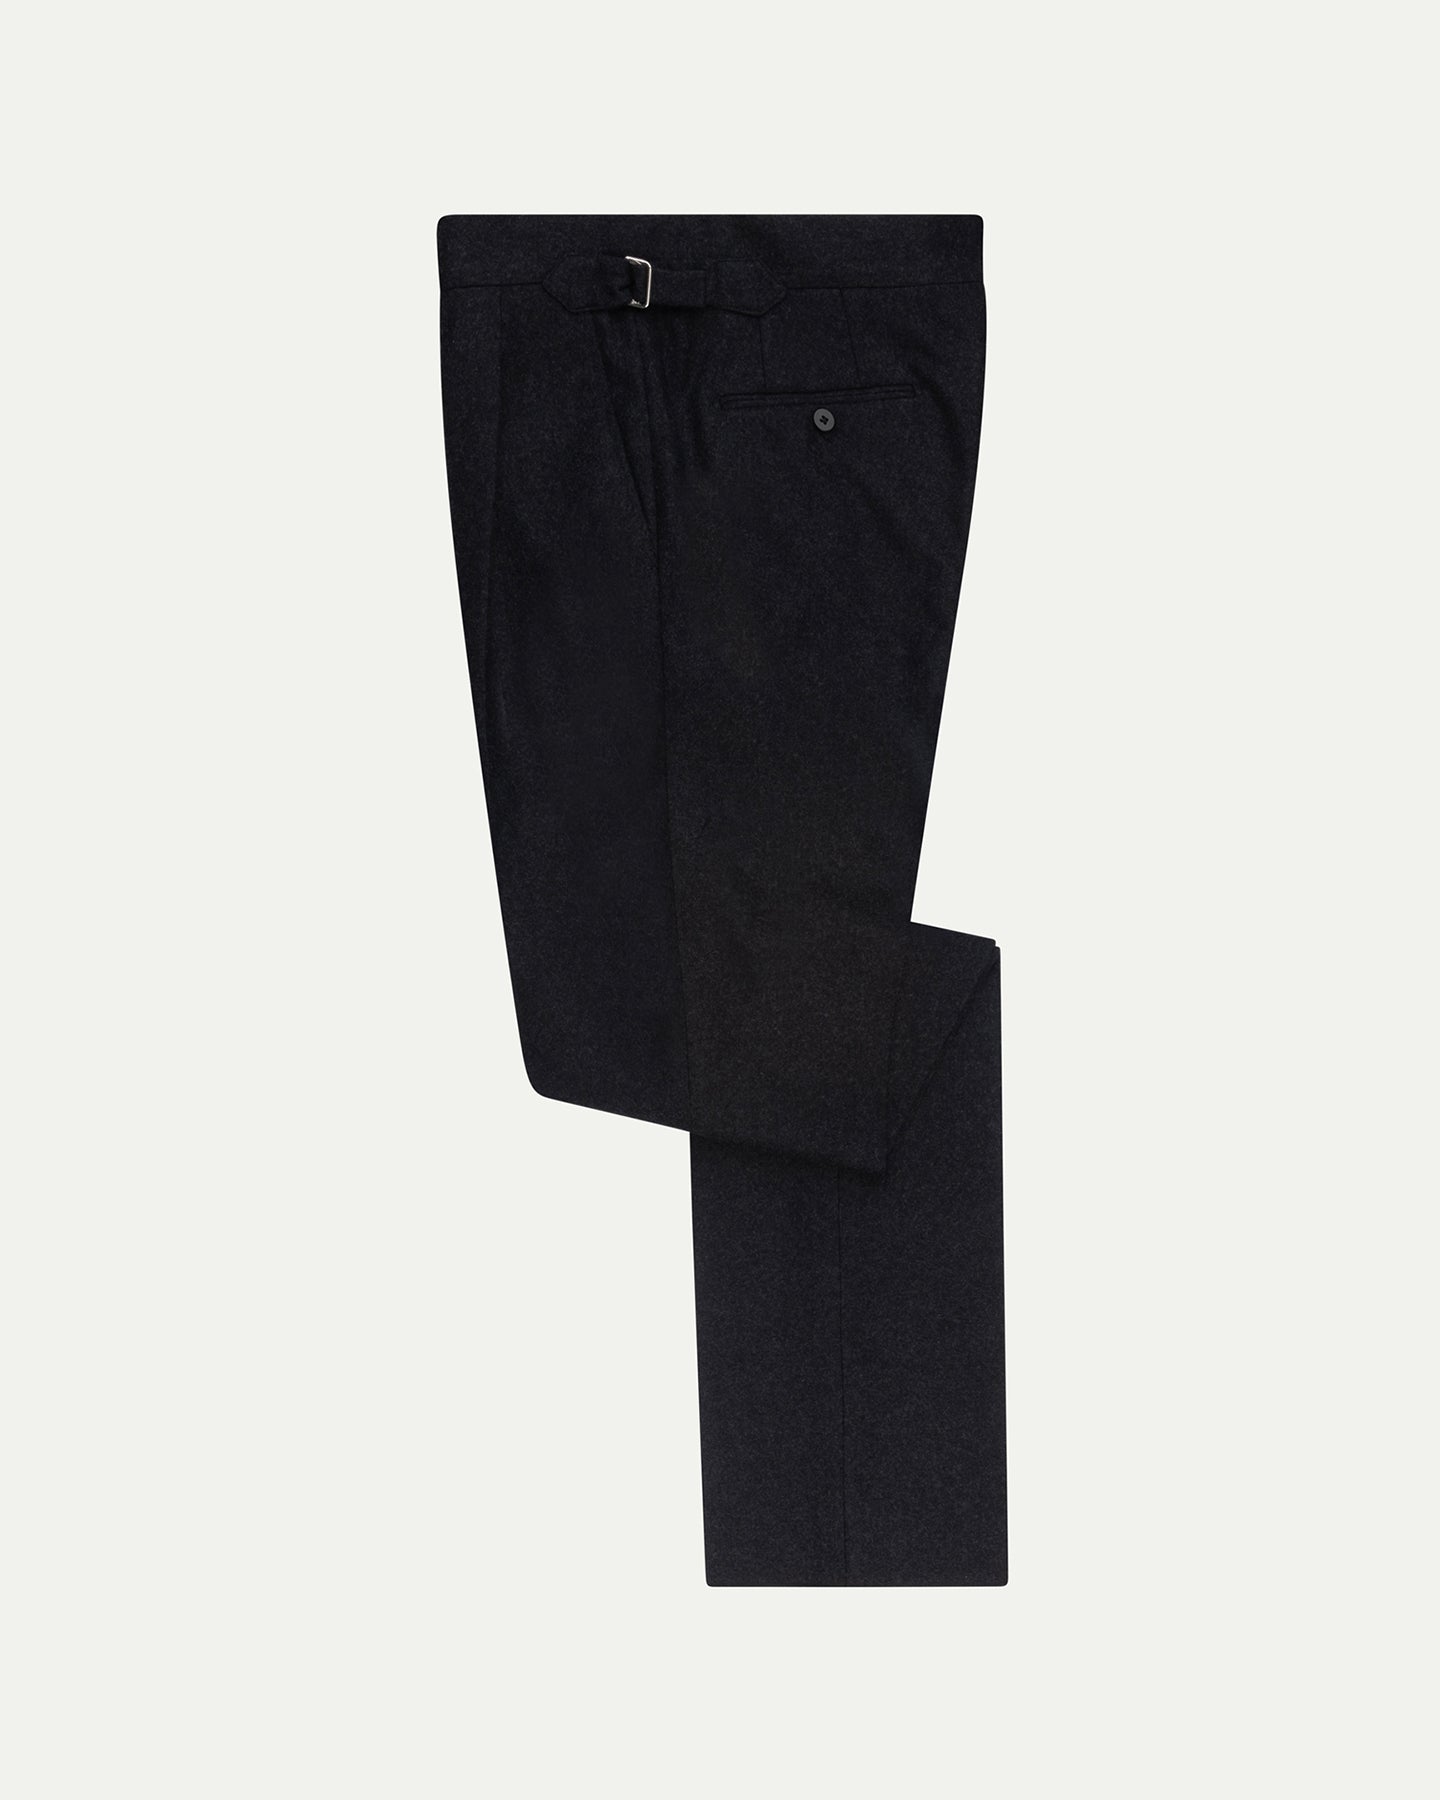 Made-To-Order Trousers in Charcoal Flannel